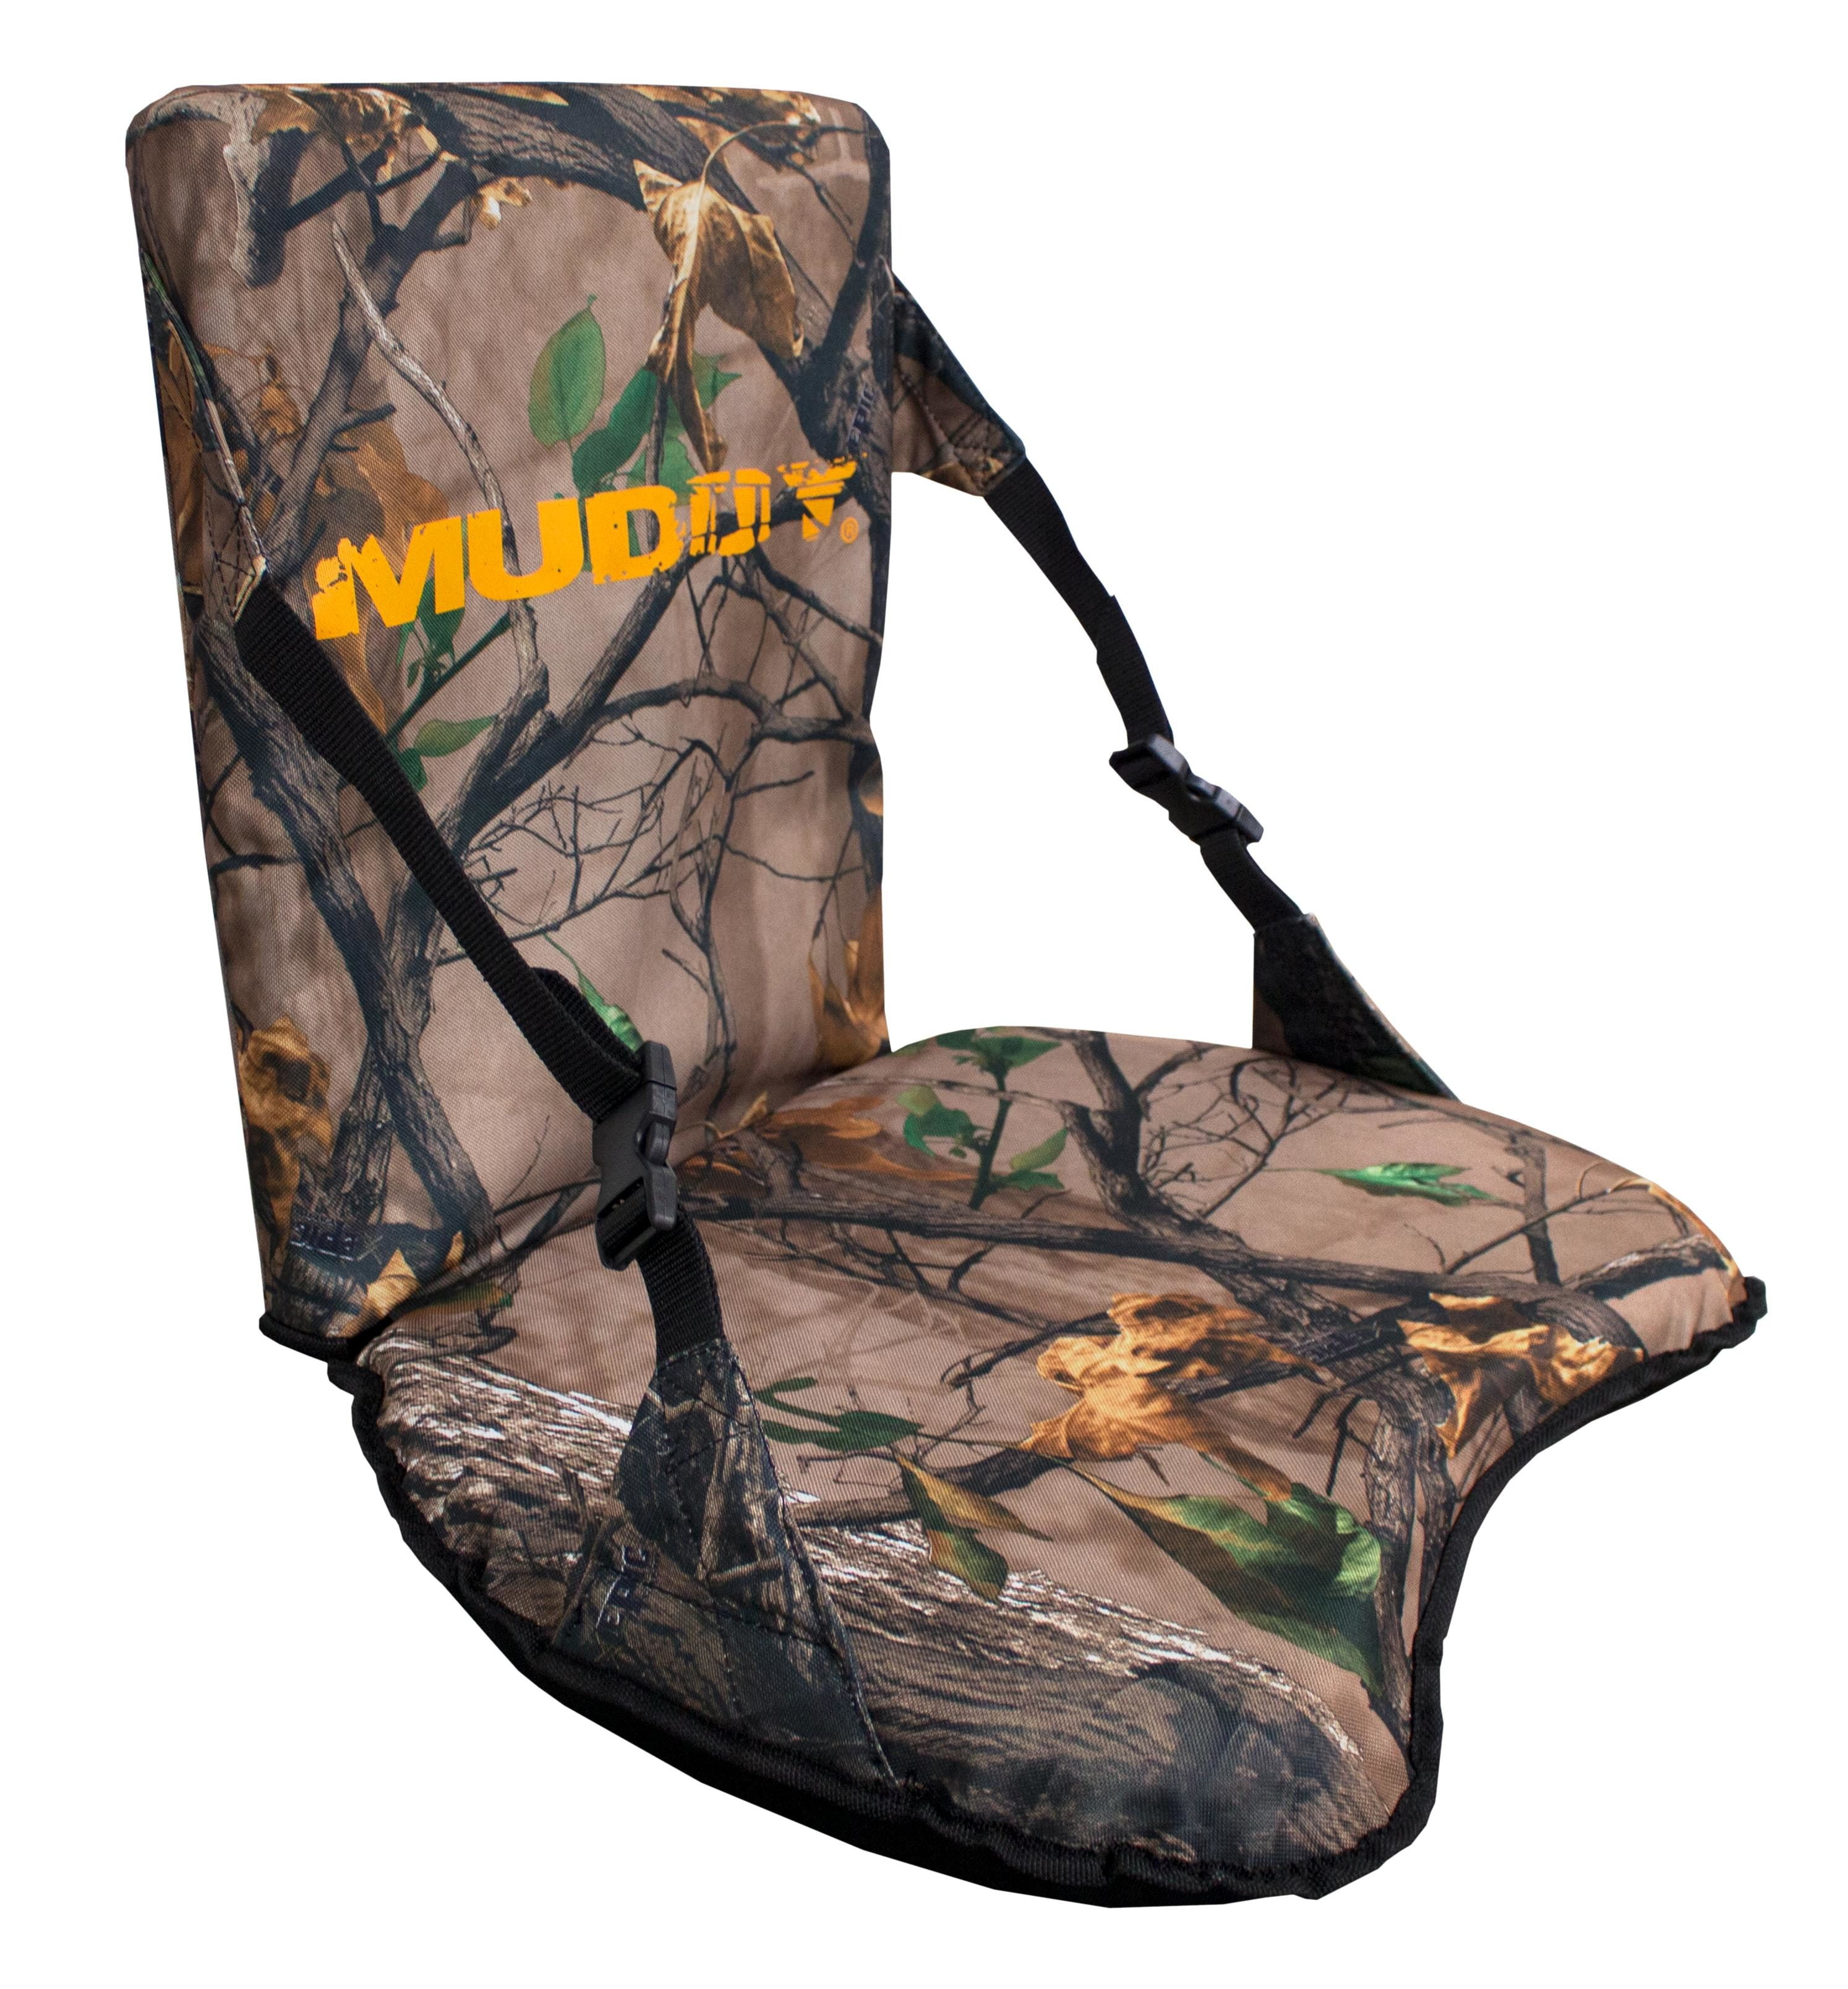 Summit SU85250 Treestand Surround Seat with Mossy Oak Cushion for sale online 